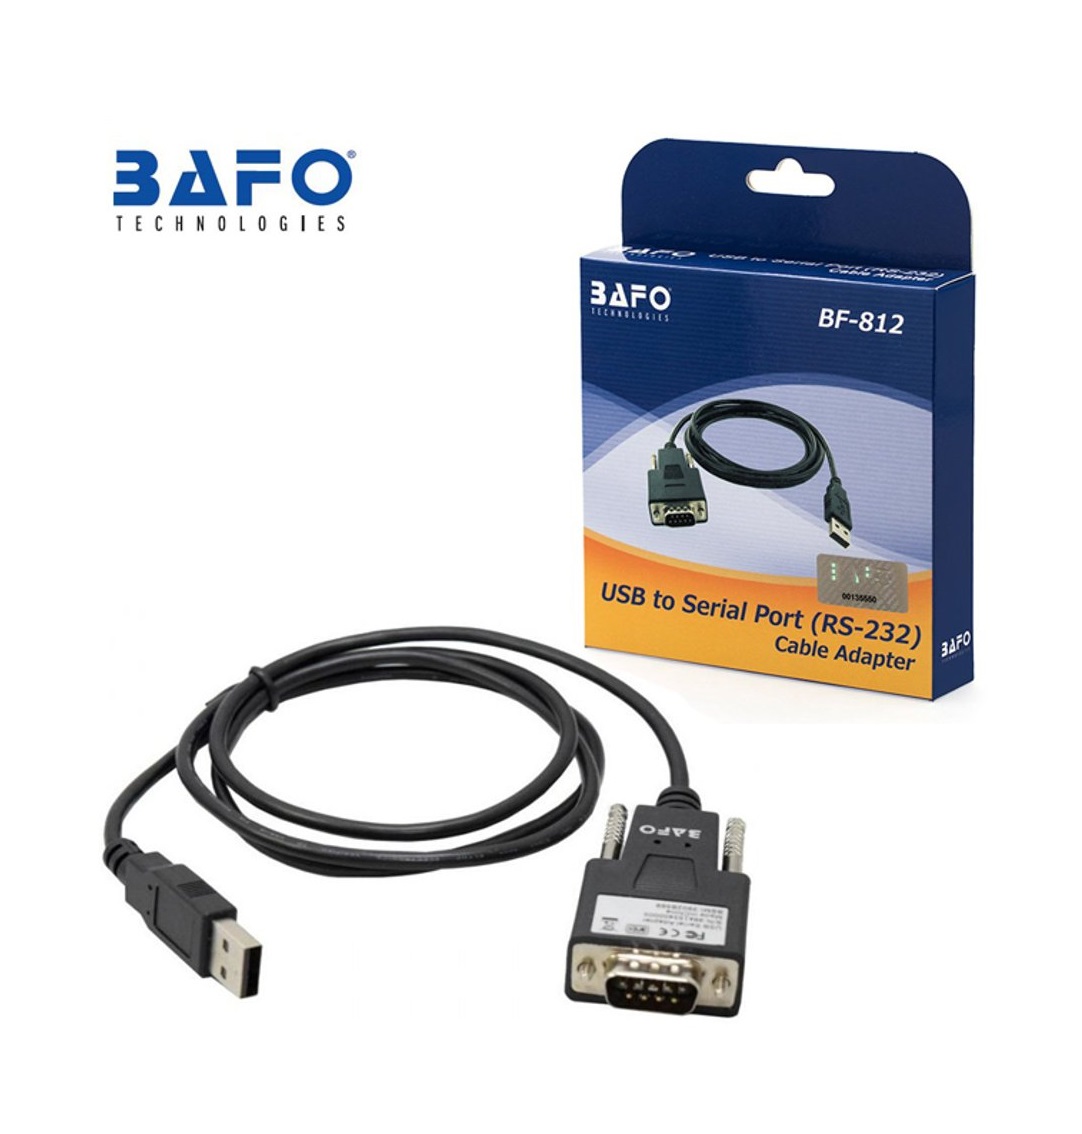 USB to Serial Port Adaptor With Cable-BF-812 sharvielectronics.com